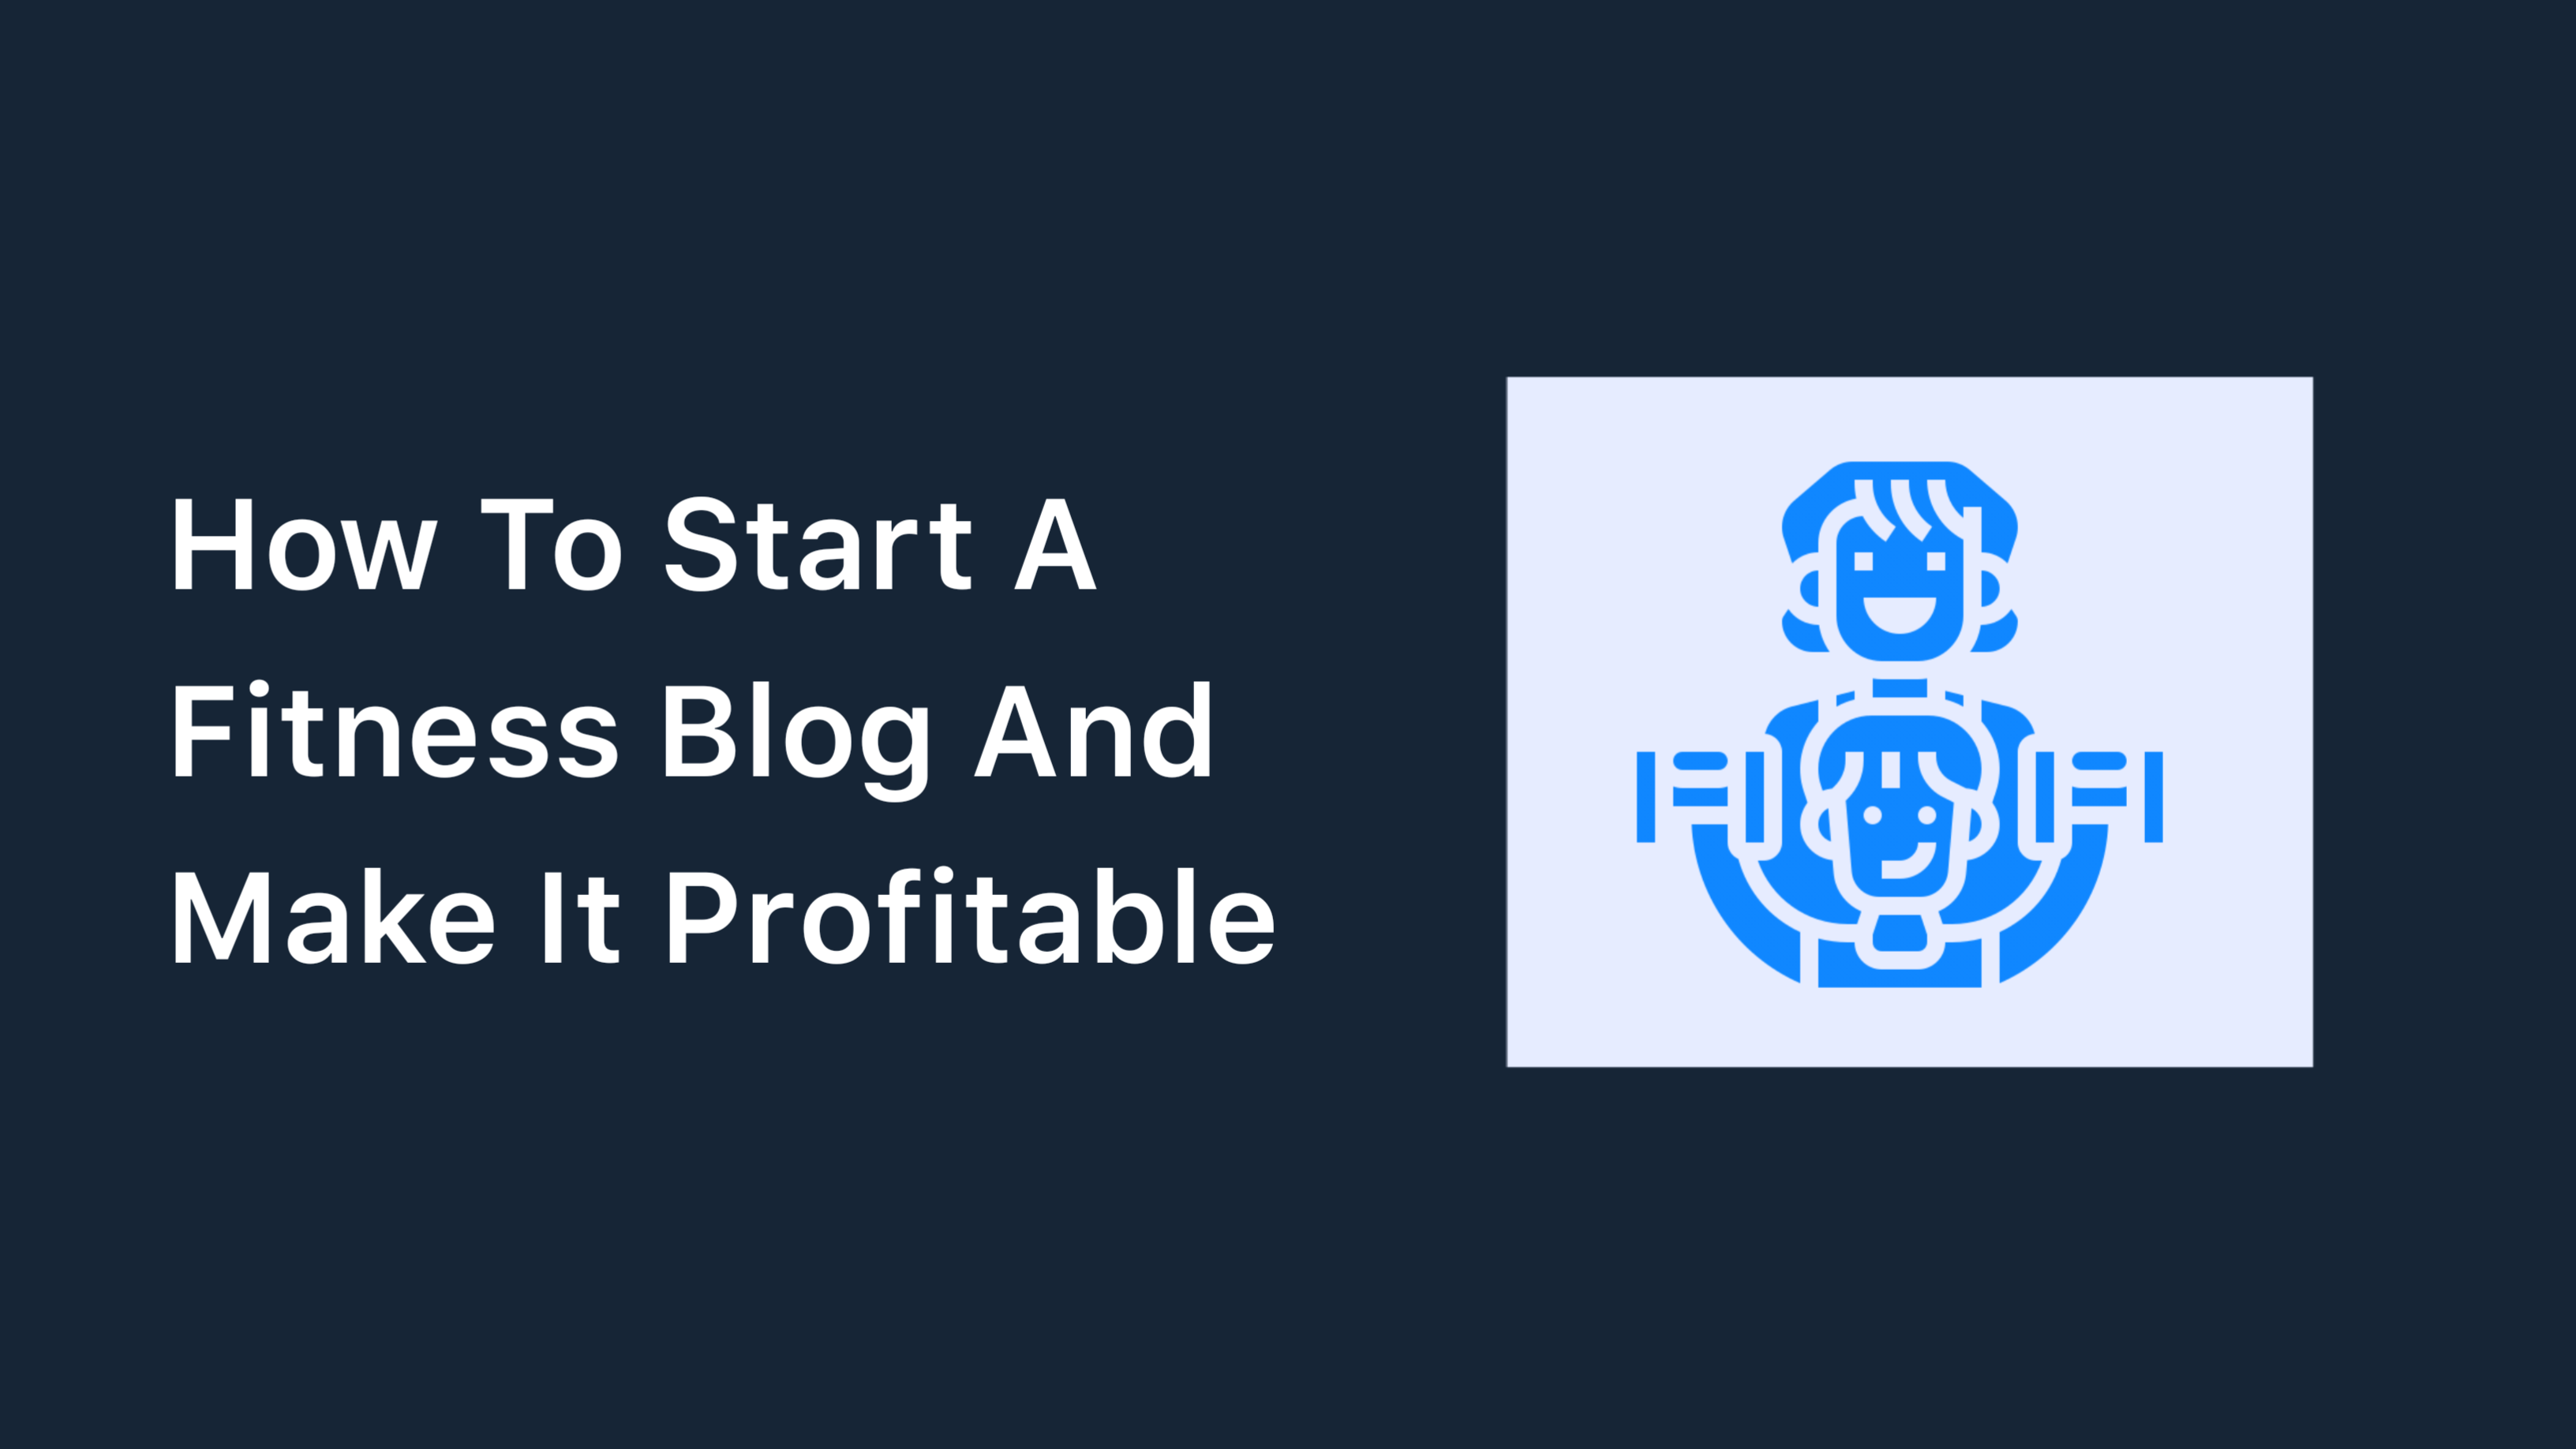 How To Start A Fitness Blog And Make It Profitable